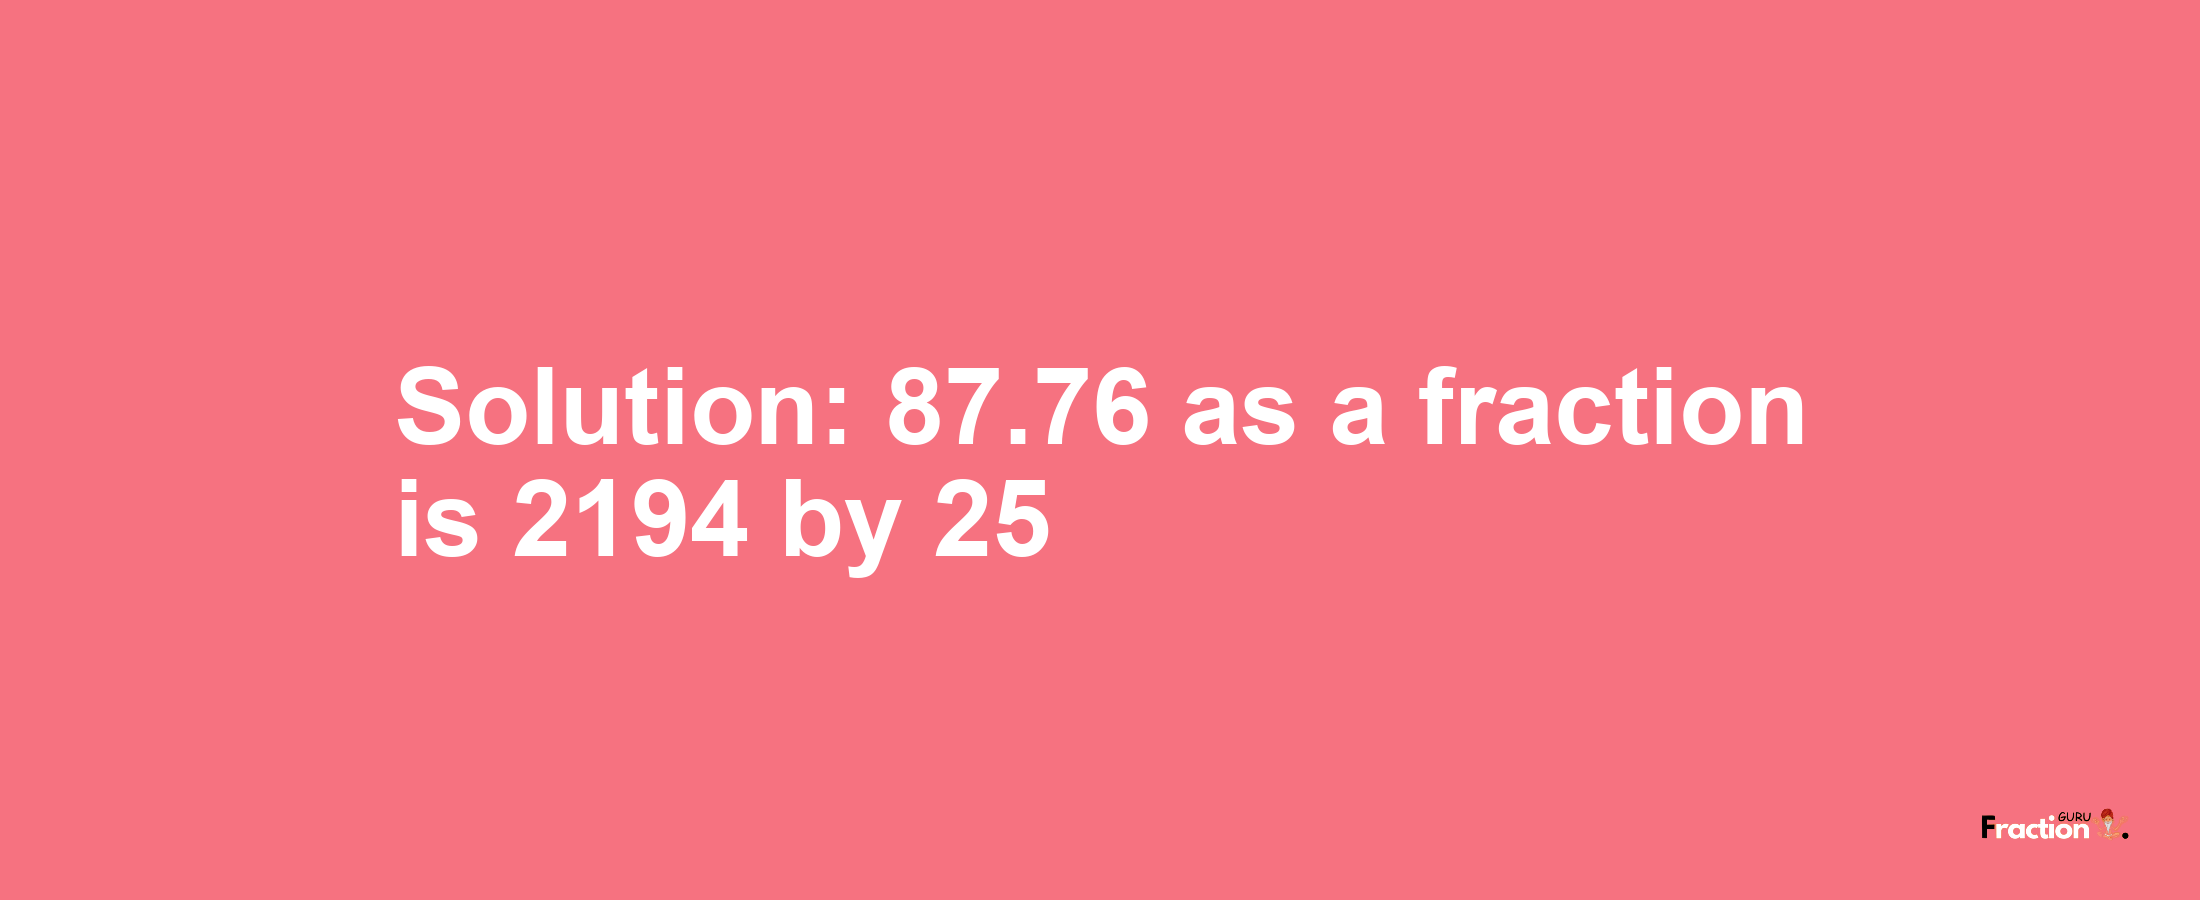 Solution:87.76 as a fraction is 2194/25